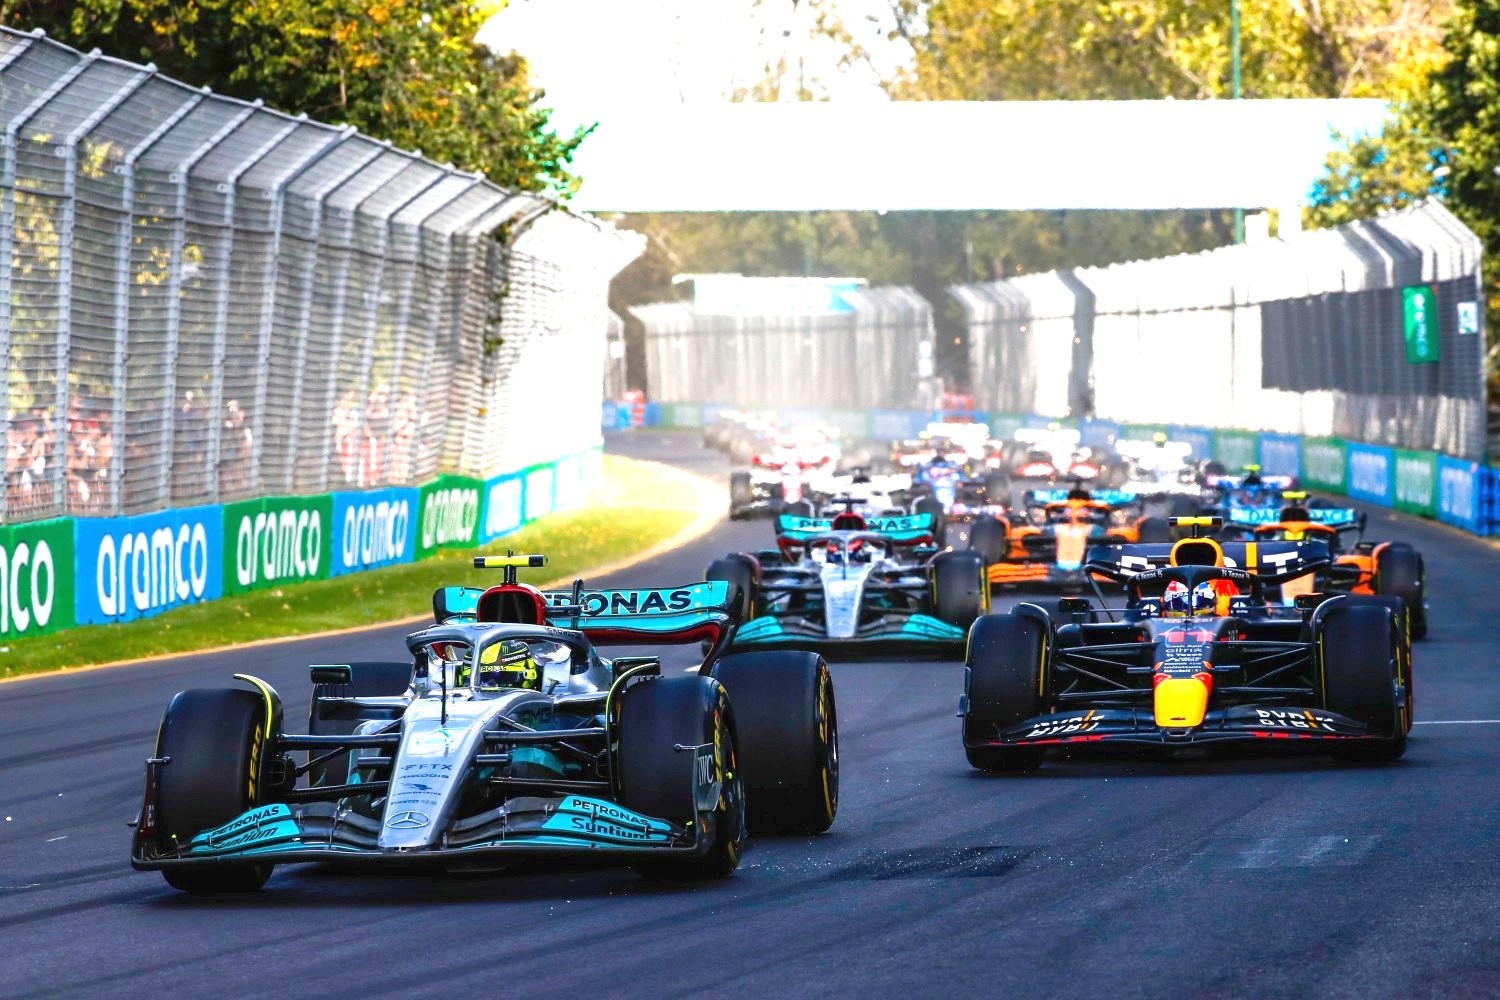 F1 Formula 1 to race in Melbourne until 2035 in new agreement